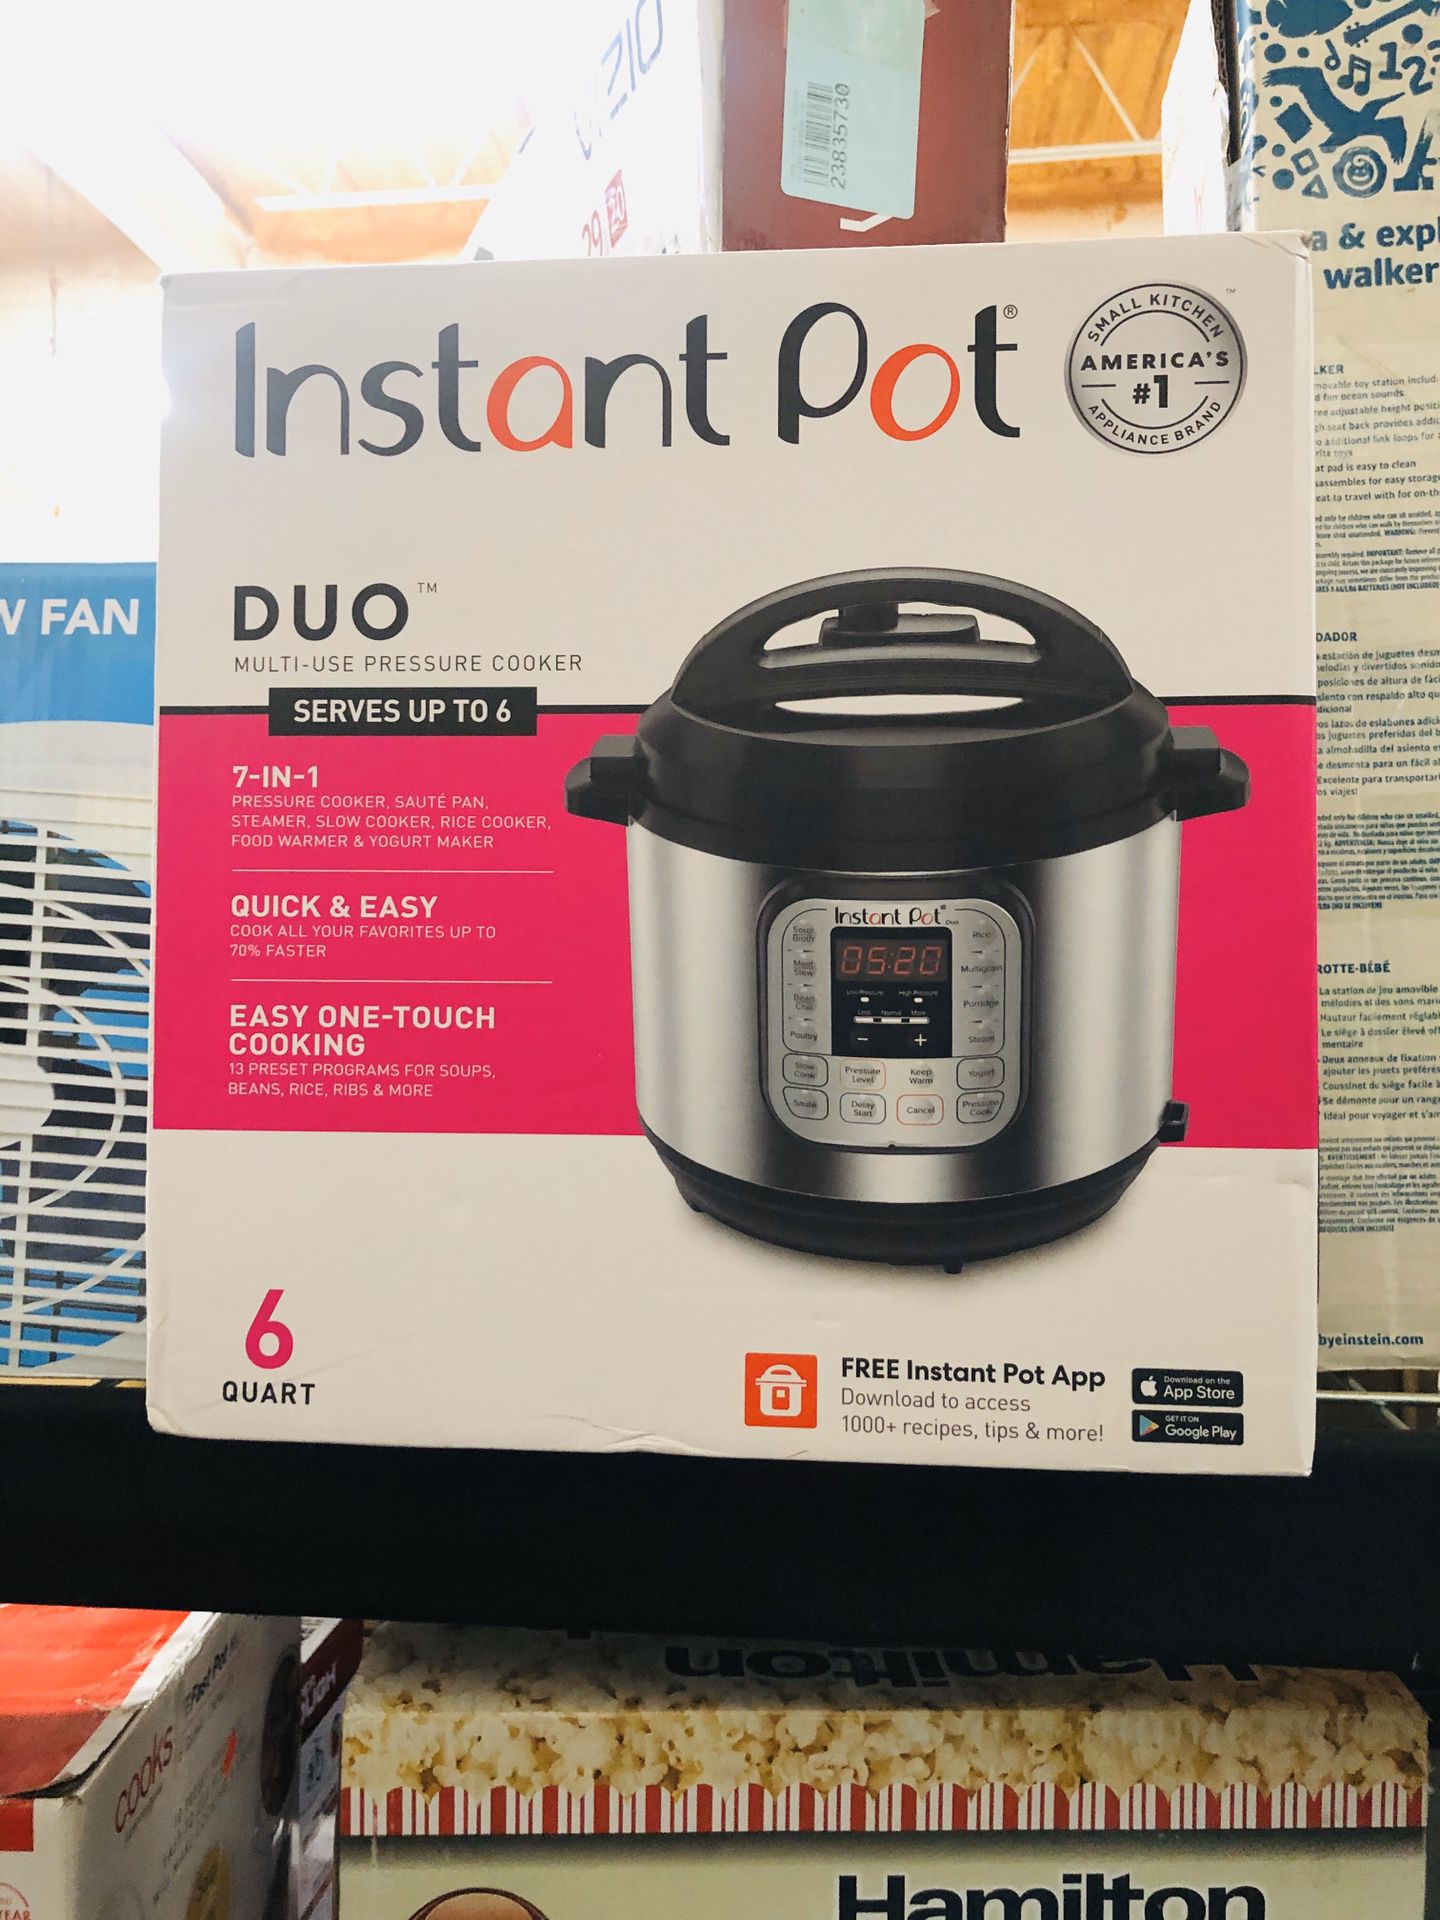 Instant Pot DUO60 6-Quart 7-in-1 Multi-Use Programmable Pressure Cooker, Slow Cooker, Rice Cooker, Sauté, Steamer, Yogurt Maker and Warmer